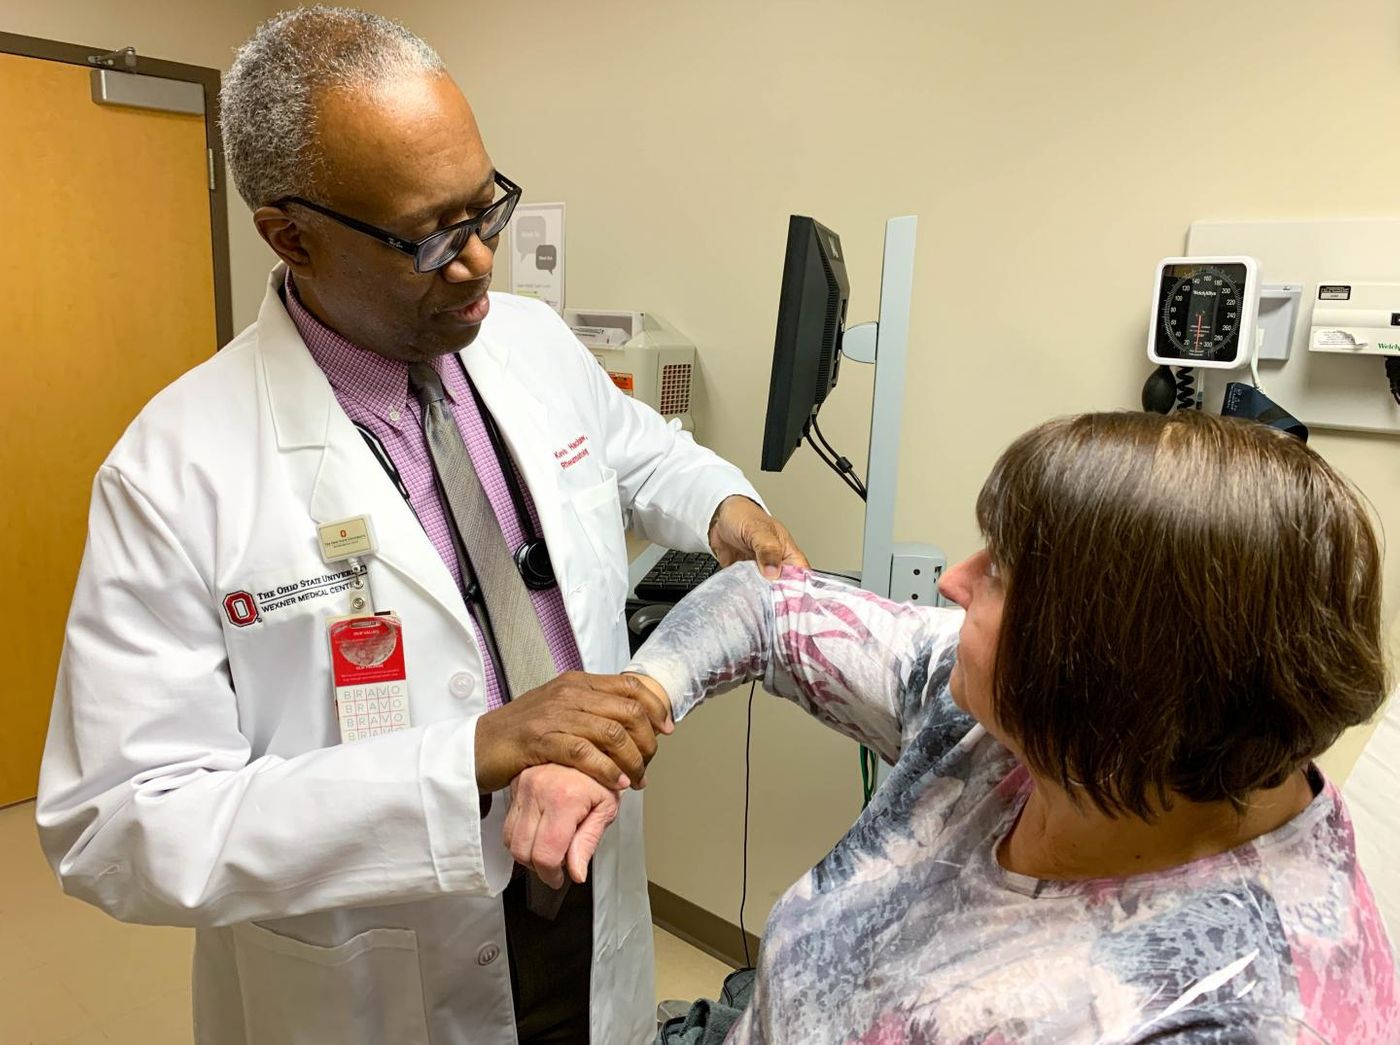 Dr. Kevin Hackshaw examines fibromyalgia patient Barb Hartong at The Ohio State University Wexner Medical Center. A new blood test may one day guide personalized treatment plans to relieve fibromyalgia pain. / Credit: The Ohio State University Wexner Medical Center